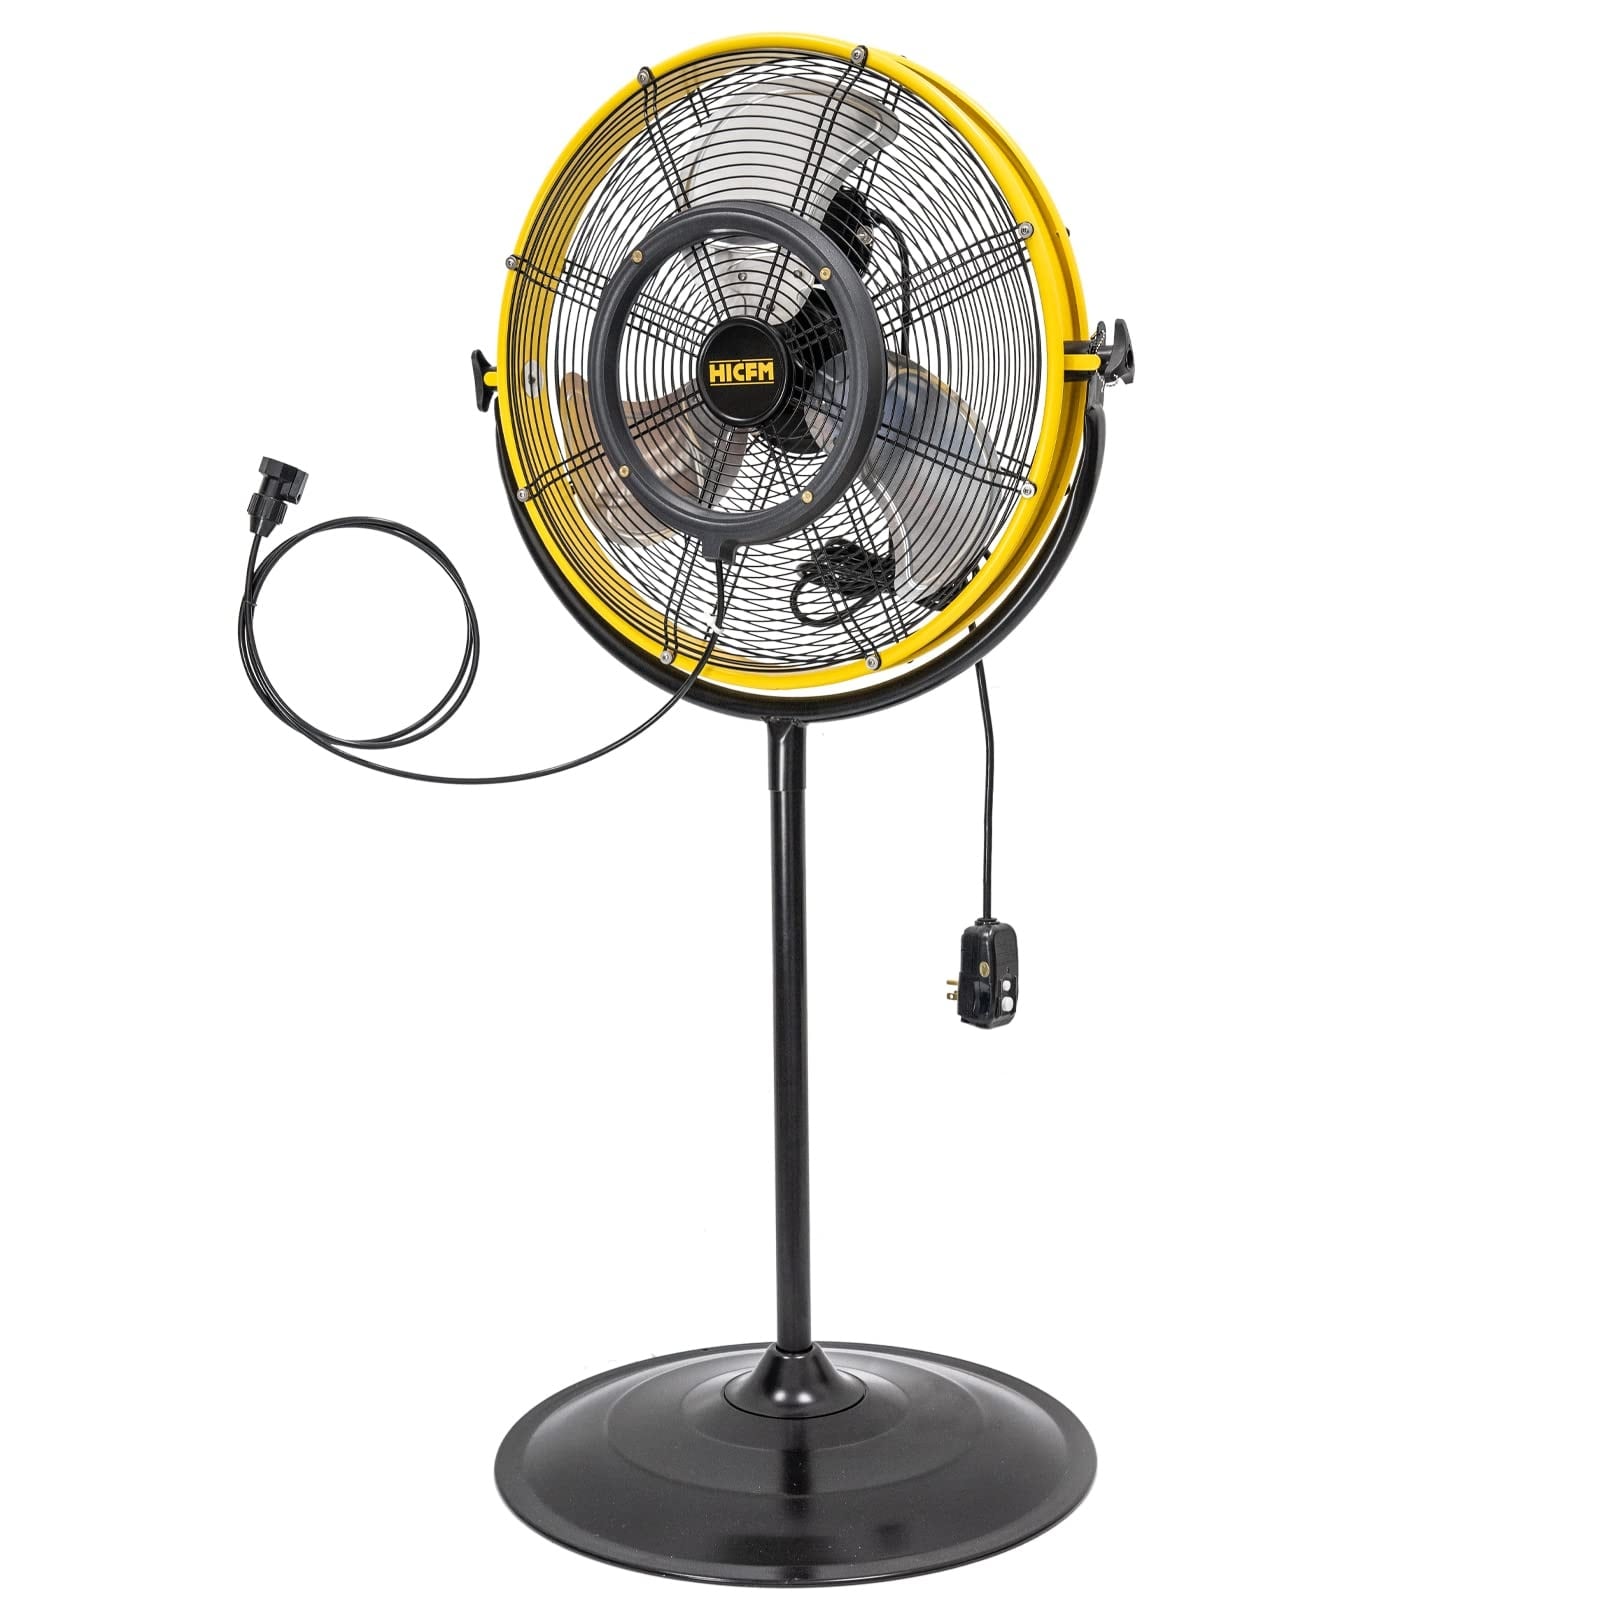 NewAir 3000 CFM 18” High Velocity Wall Mounted Fan with Sealed